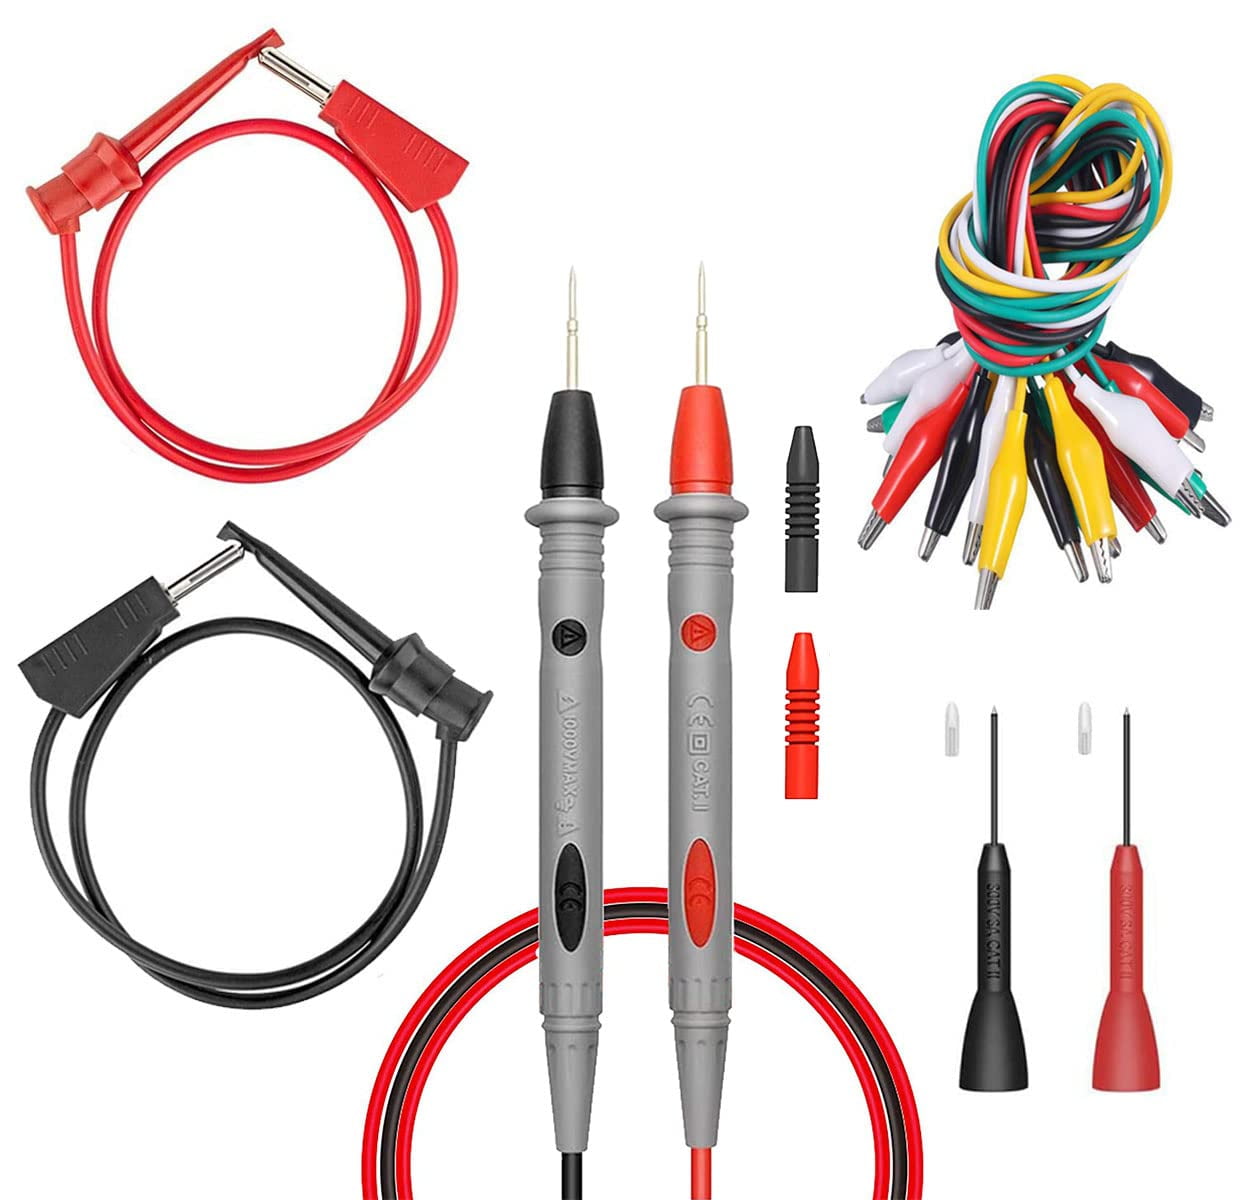 Multi-meter test leads Alligator clips Mini hooks Probe plunger Clamp meters ext 